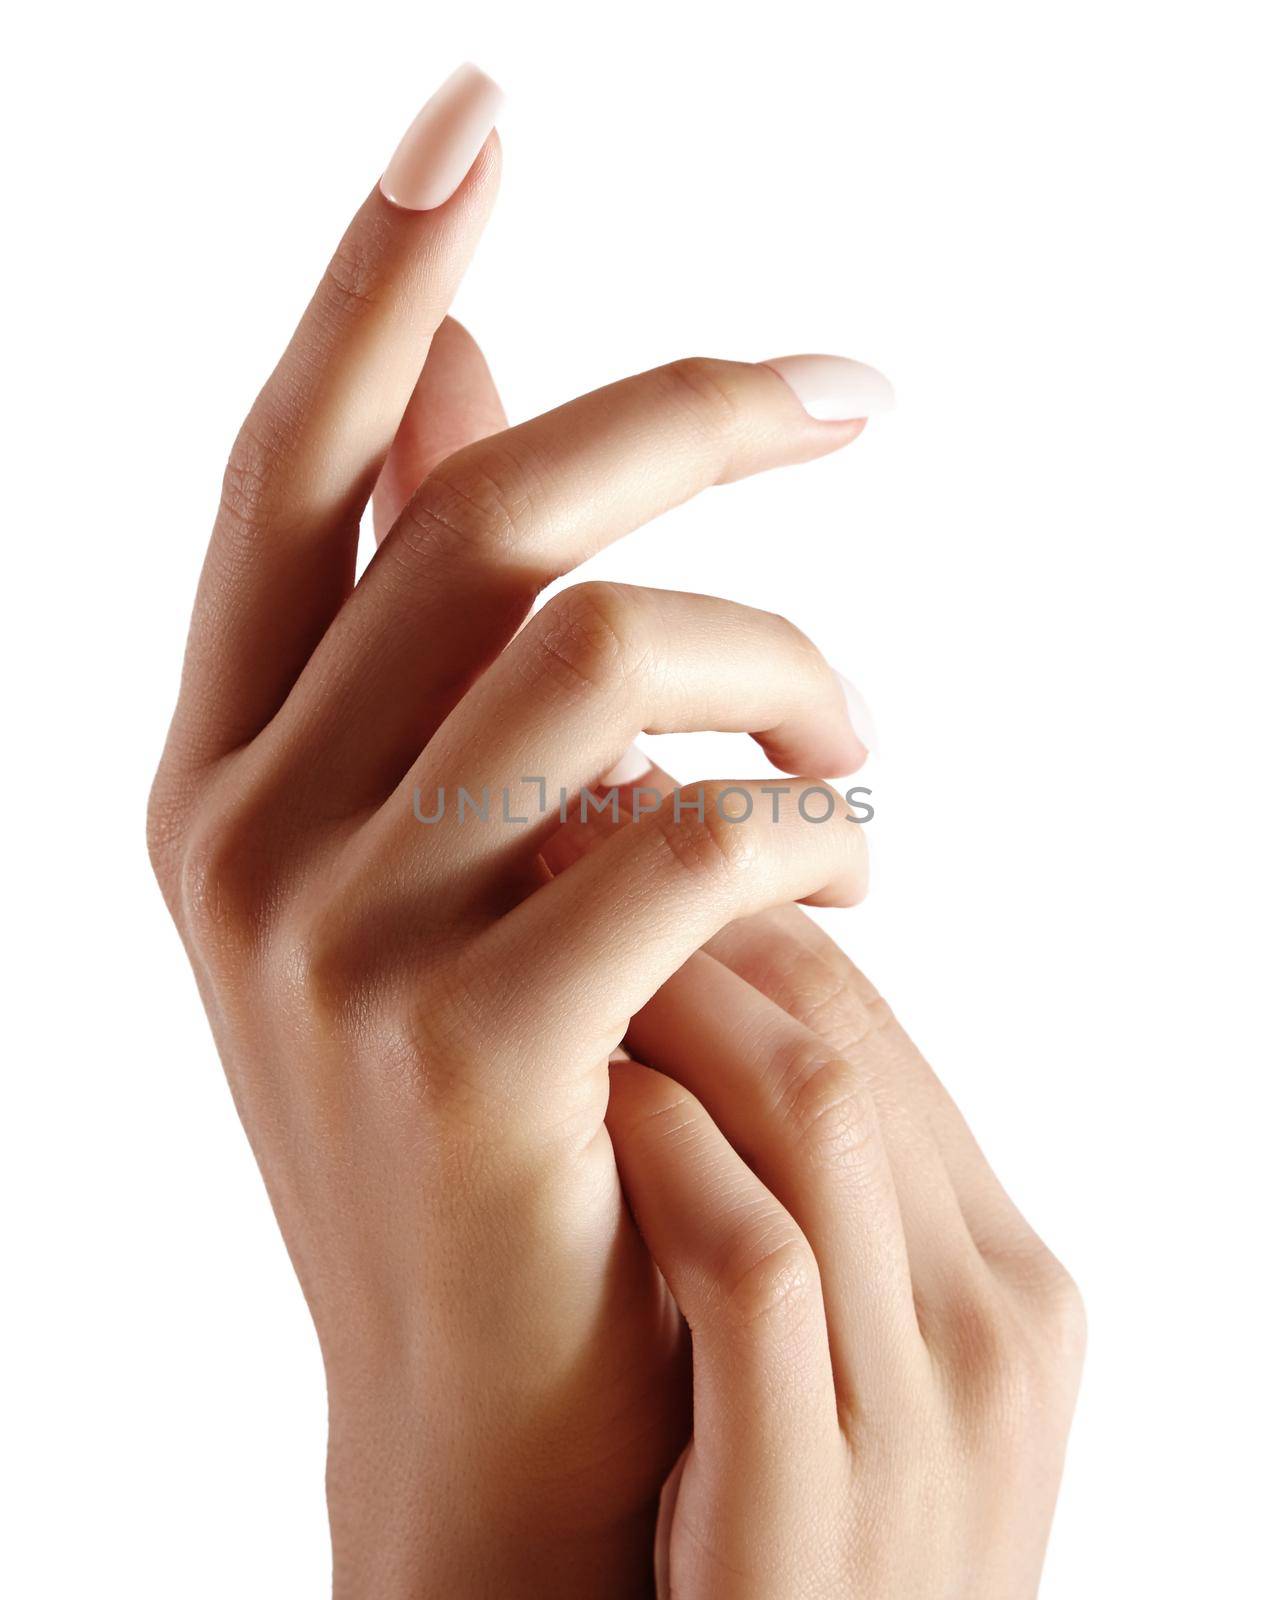 Beautiful woman's hands on light background. Care about hand. Tender palm with natural manicure, clean skin. Light beige nails